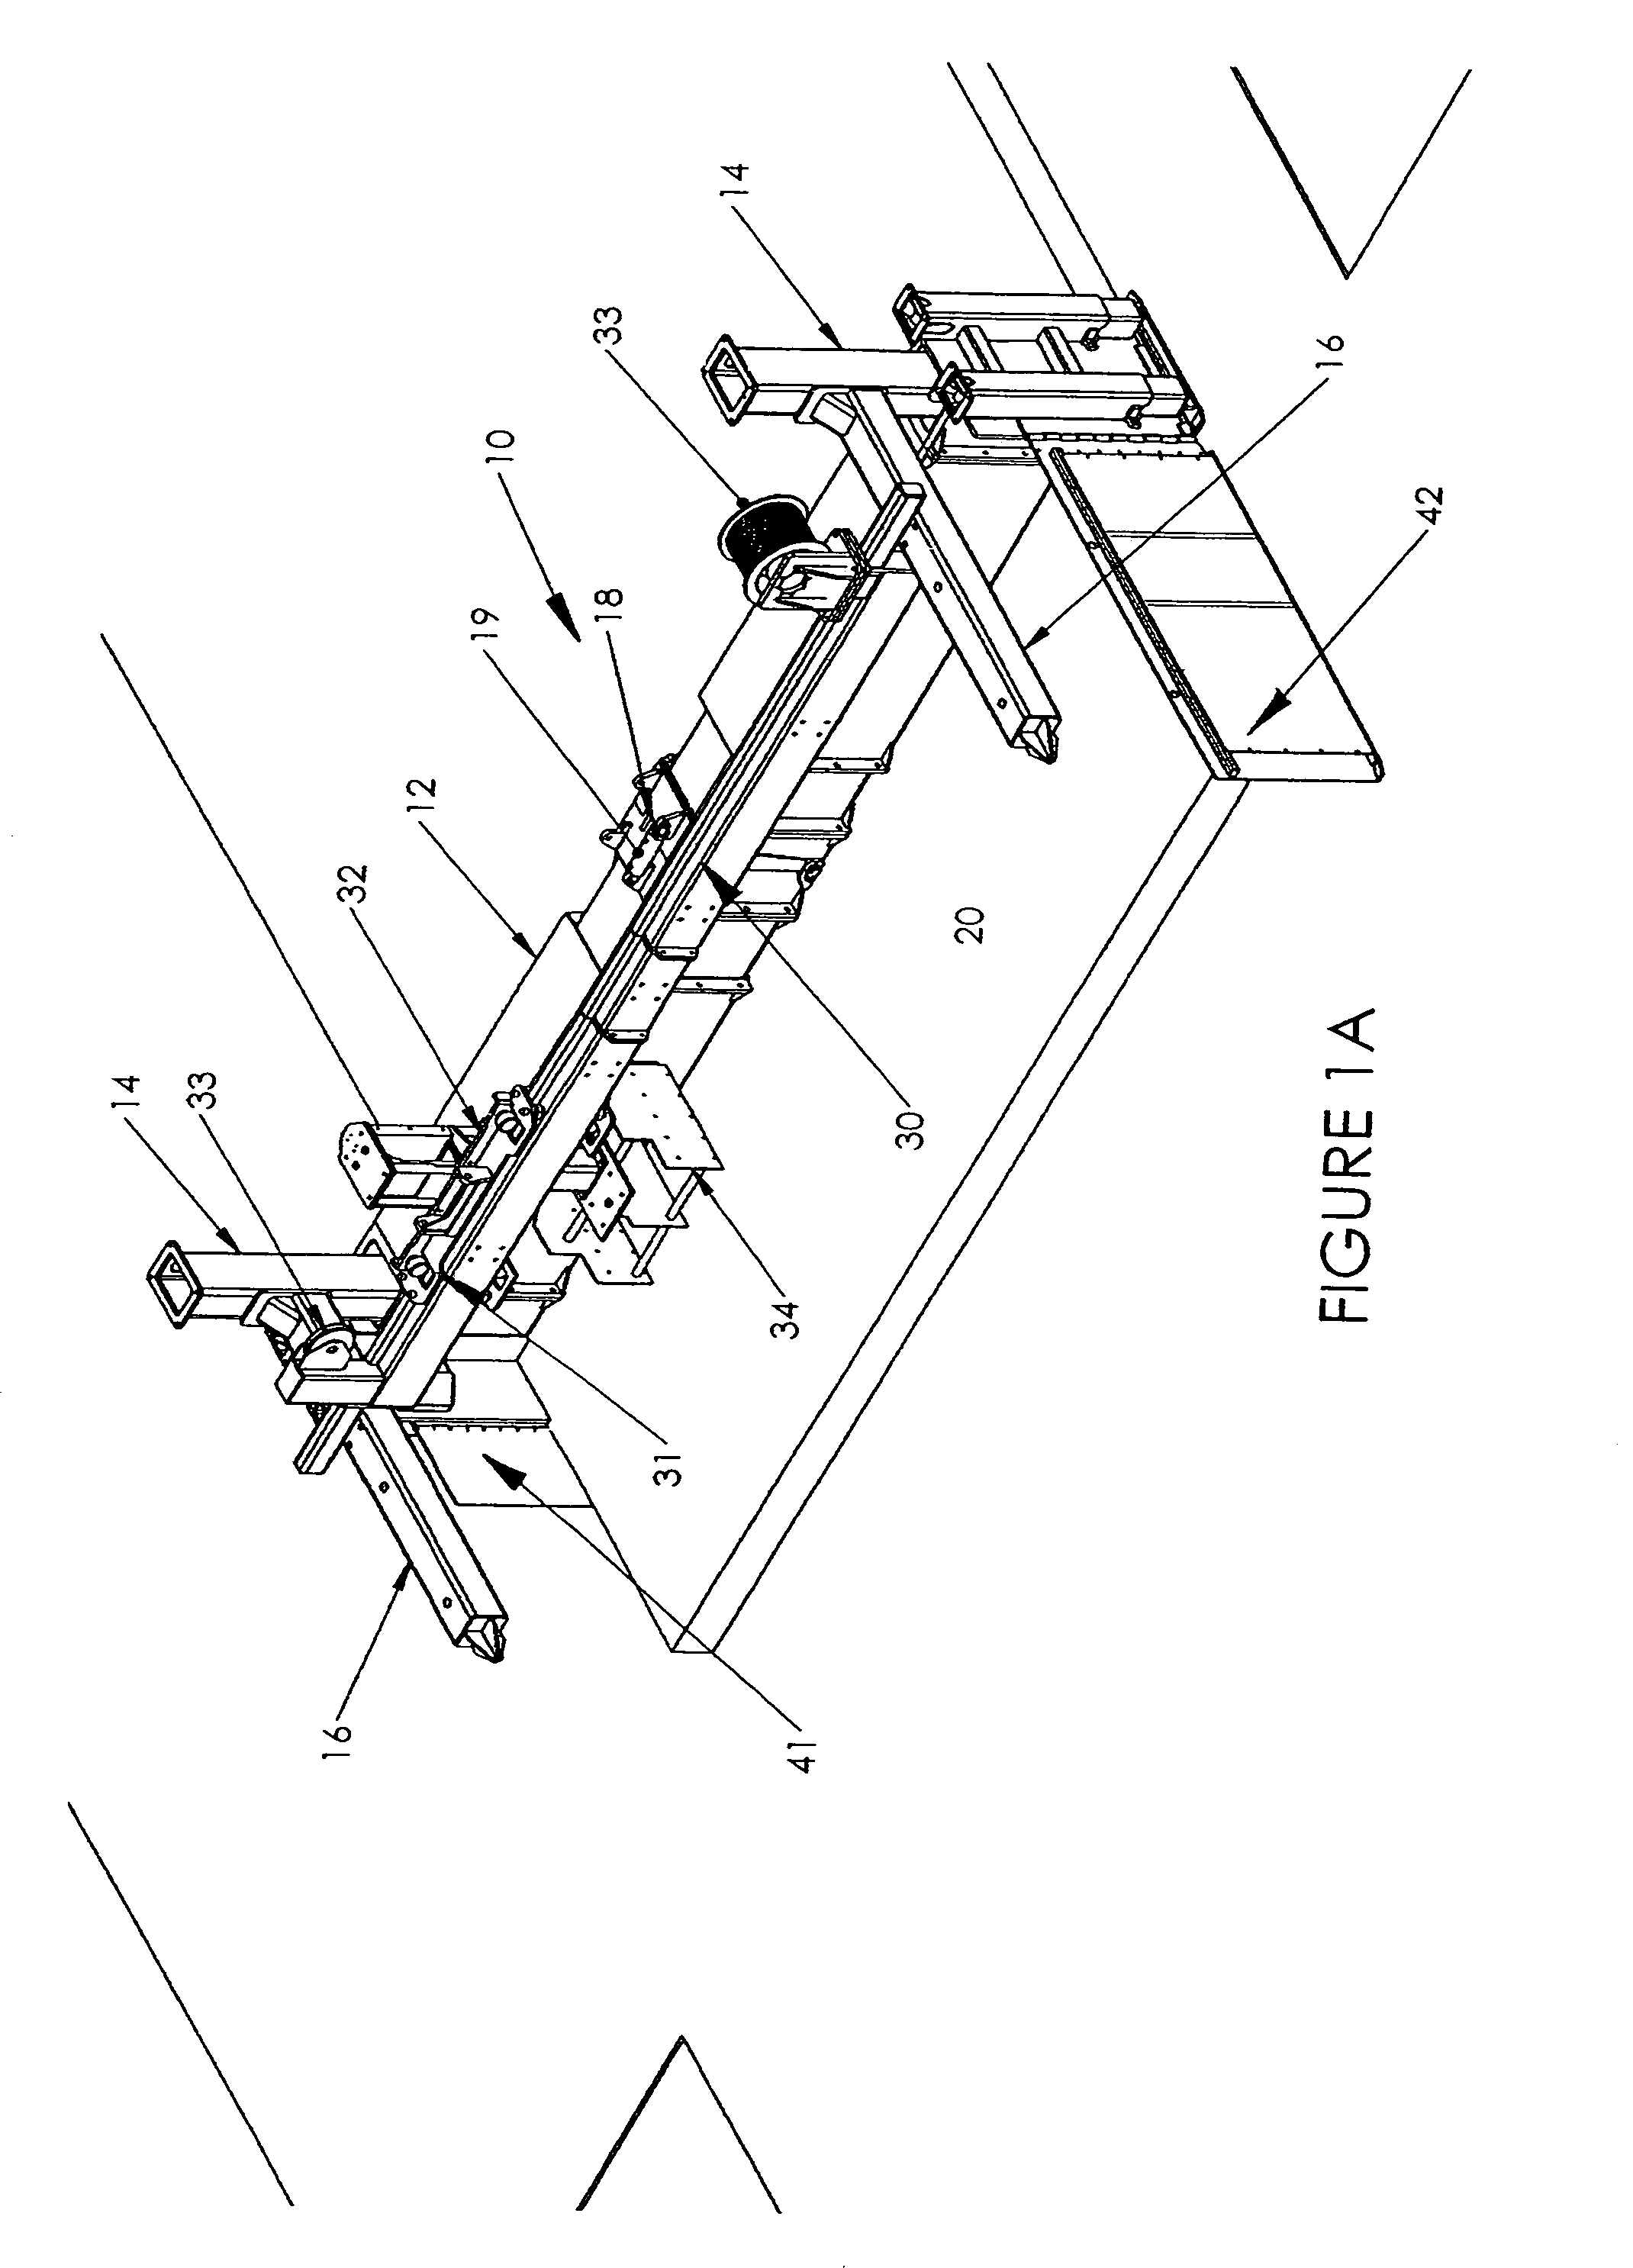 Strike-off beam and spreader plow assembly for placer/spreader